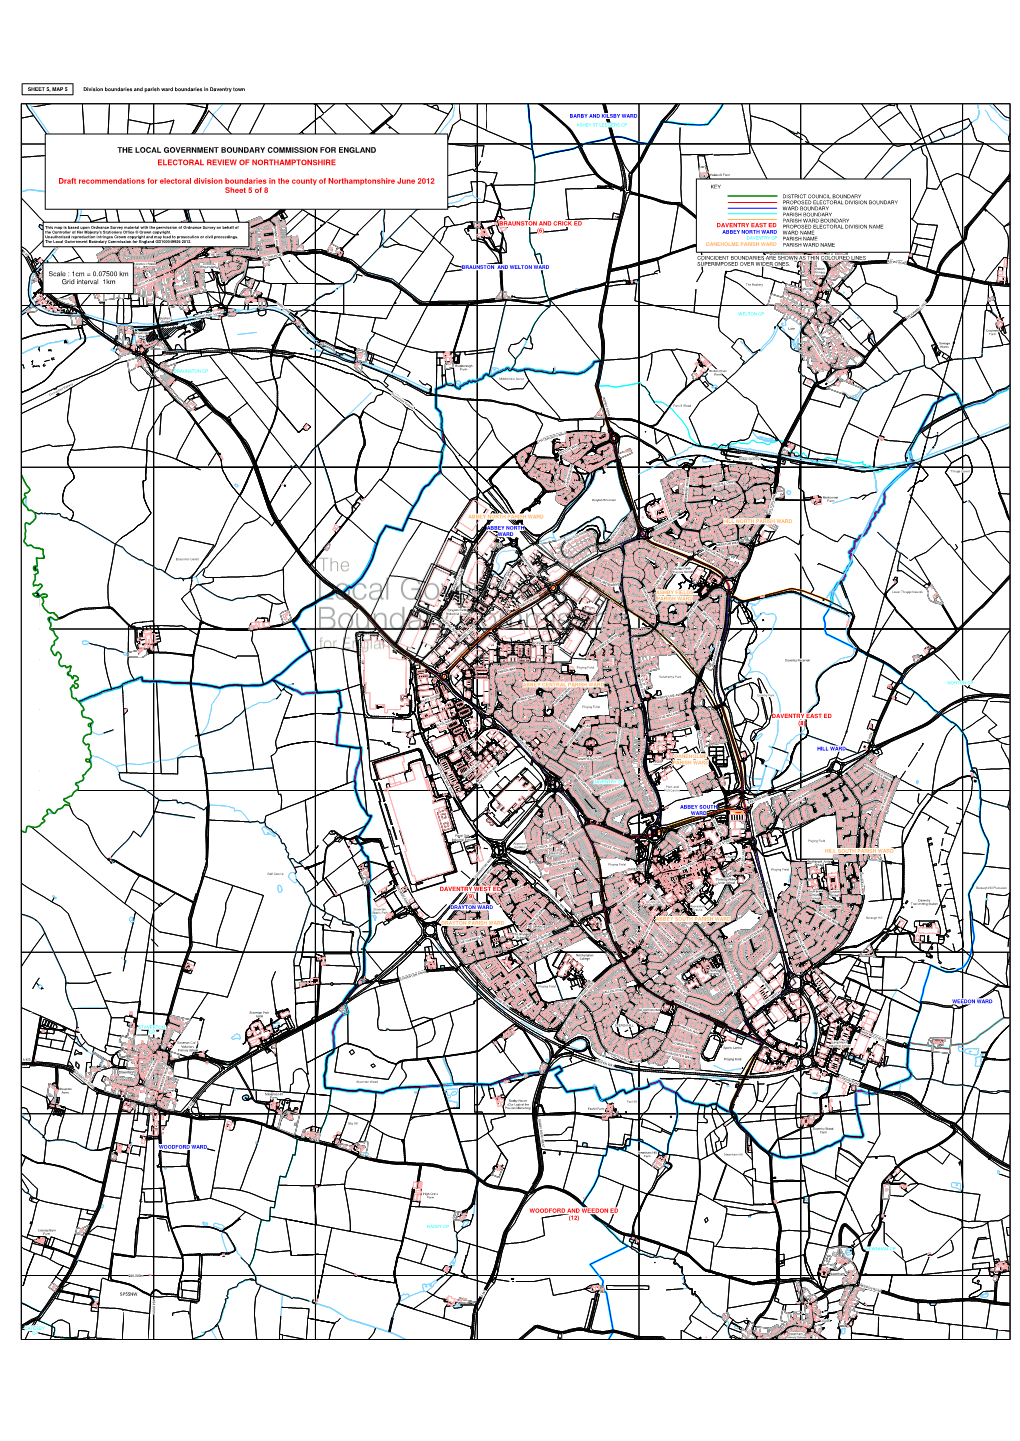 The Local Government Boundary Commission for England Electoral Review of Northamptonshire